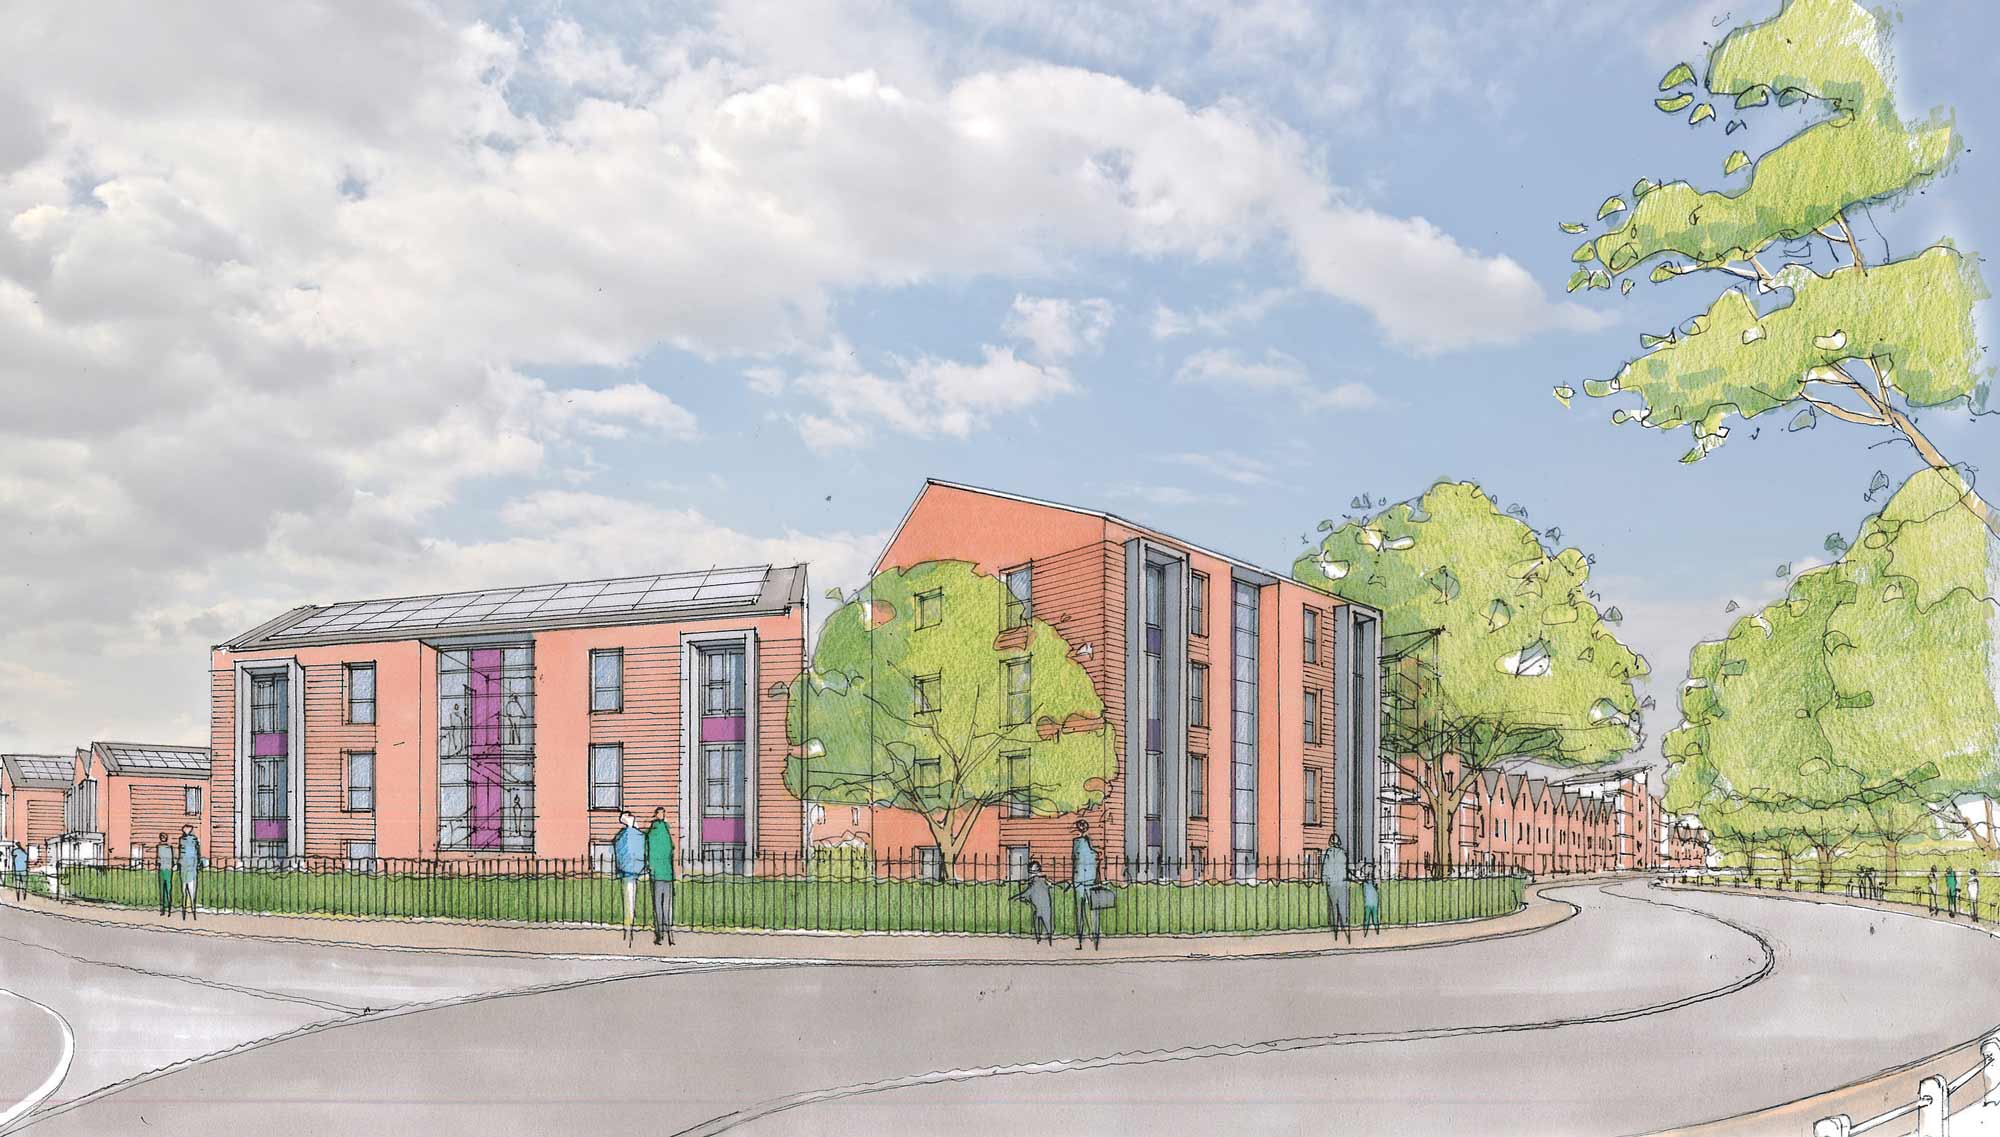 Leeds City Council and United Living propose UK’s largest modular council housing development